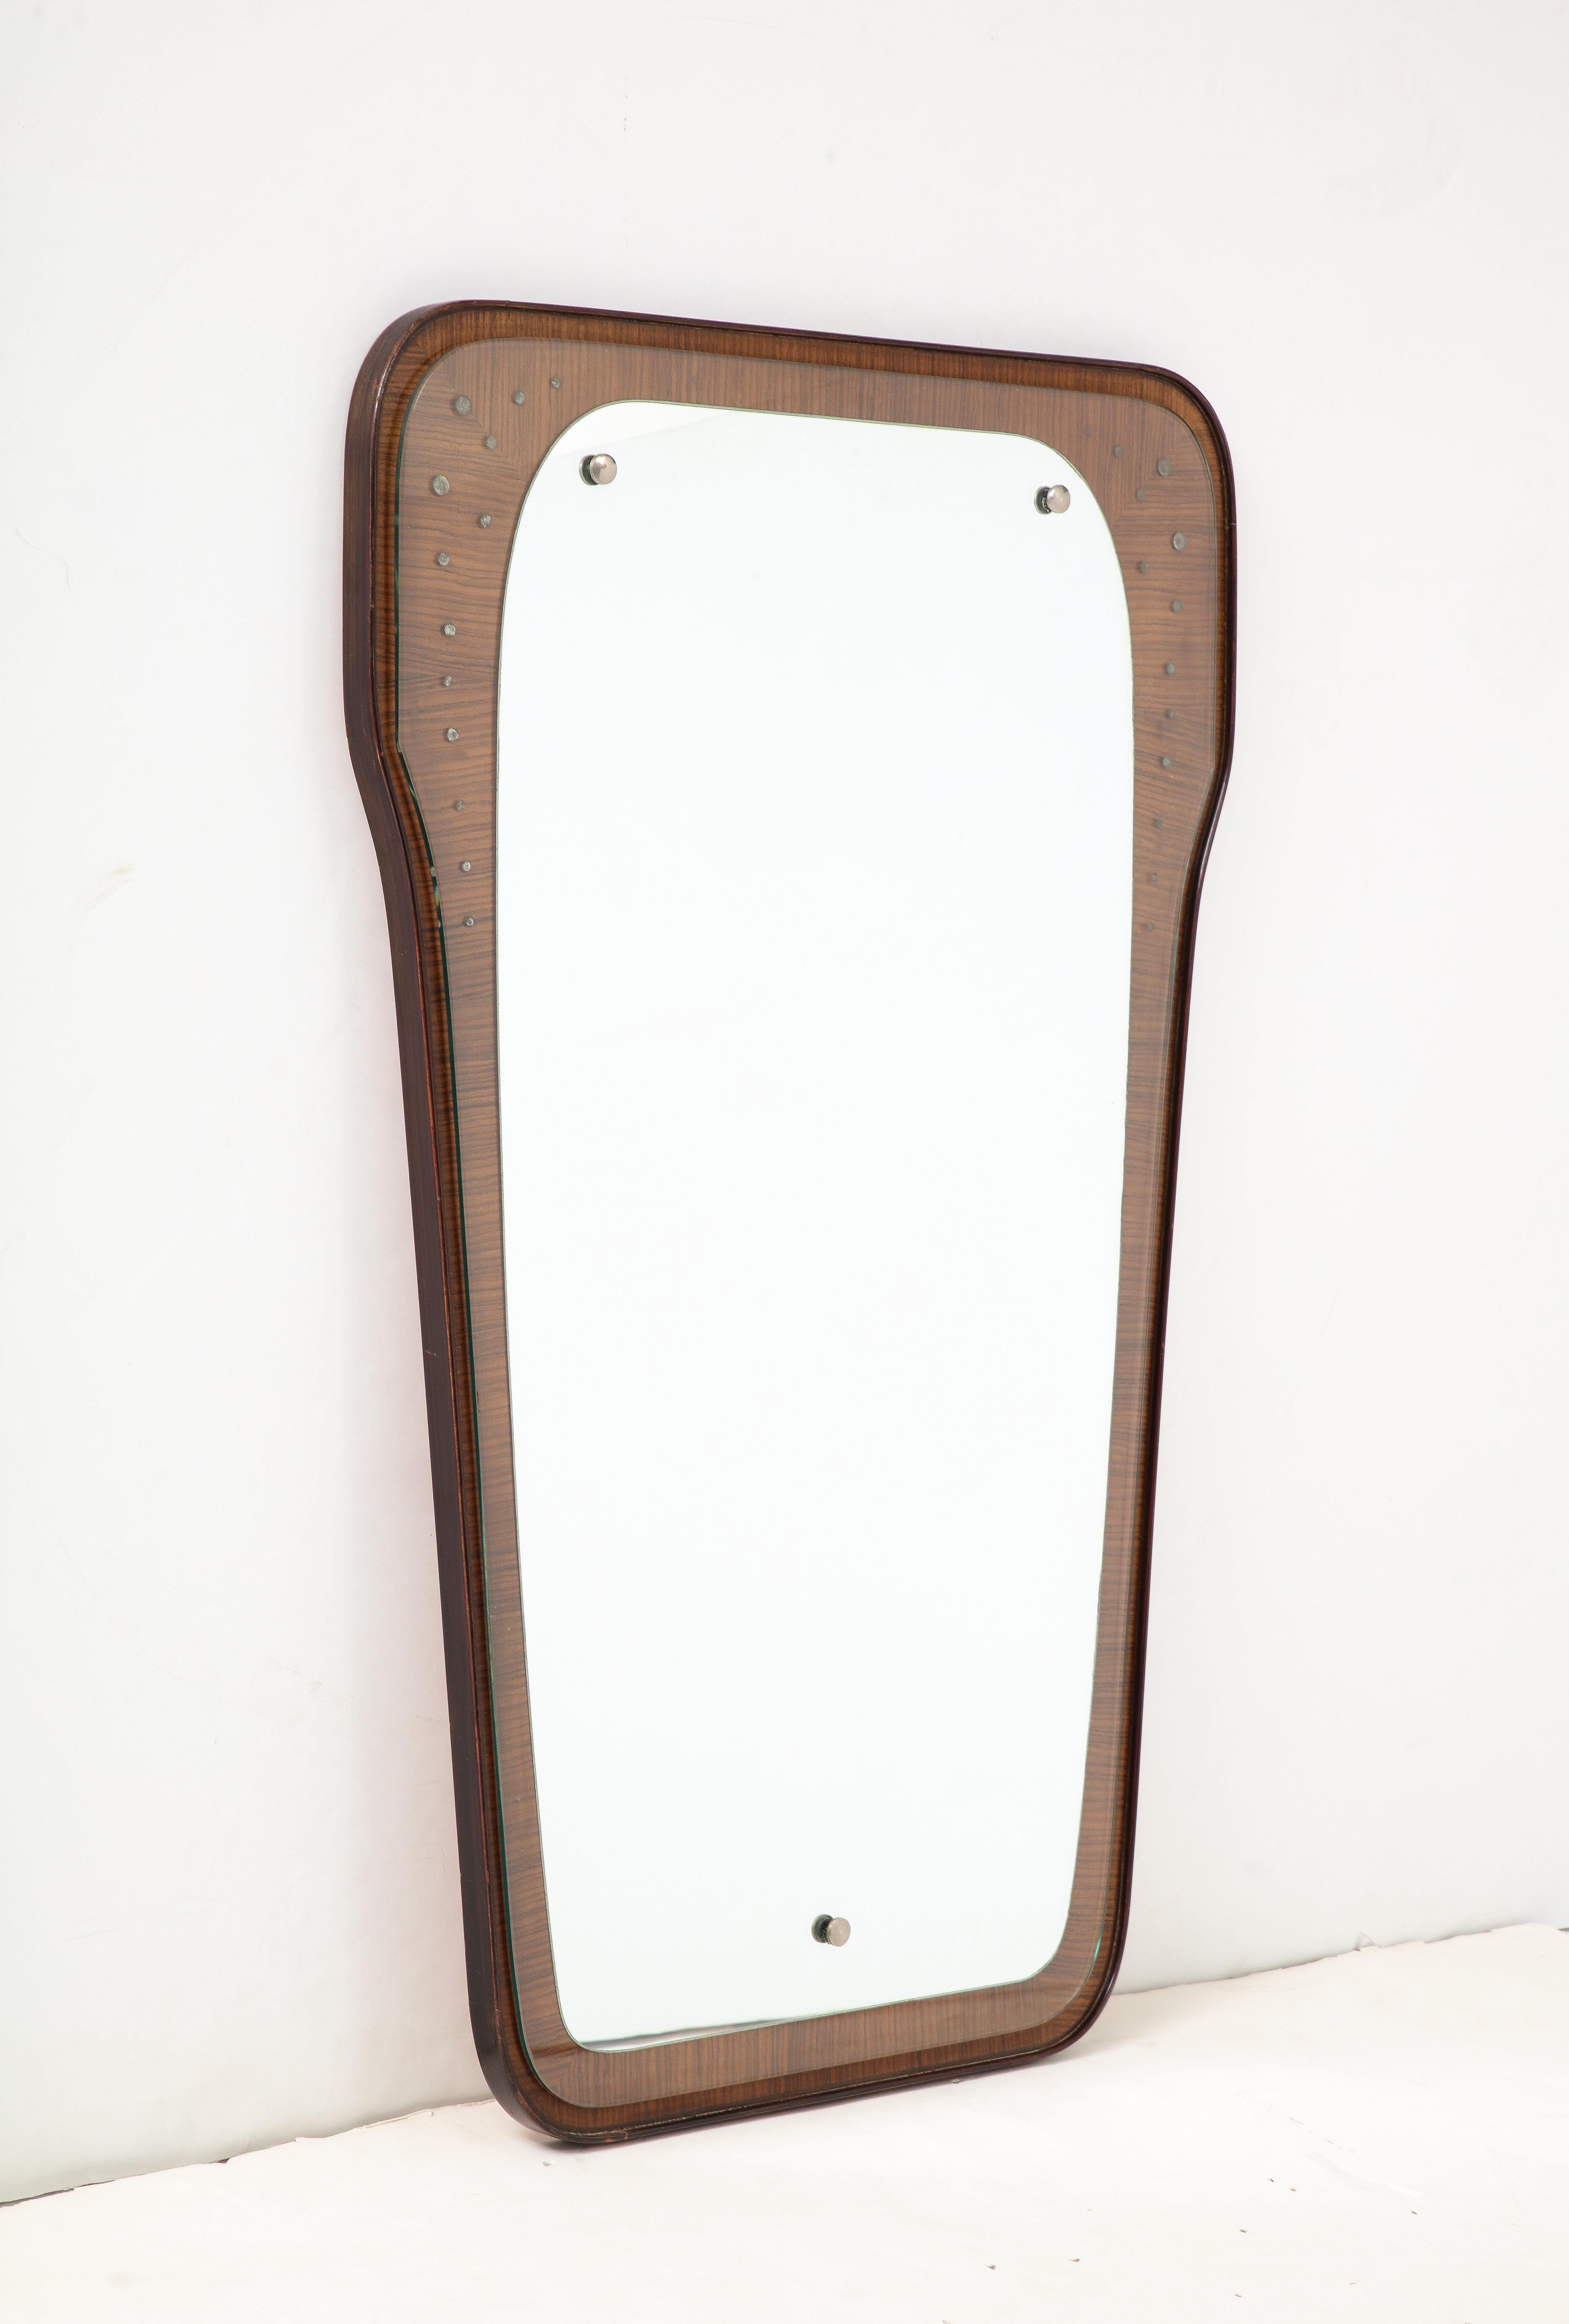 Italian Mahogany Wall Mirror with Inlaid Metal, Italy, c. 1960 For Sale